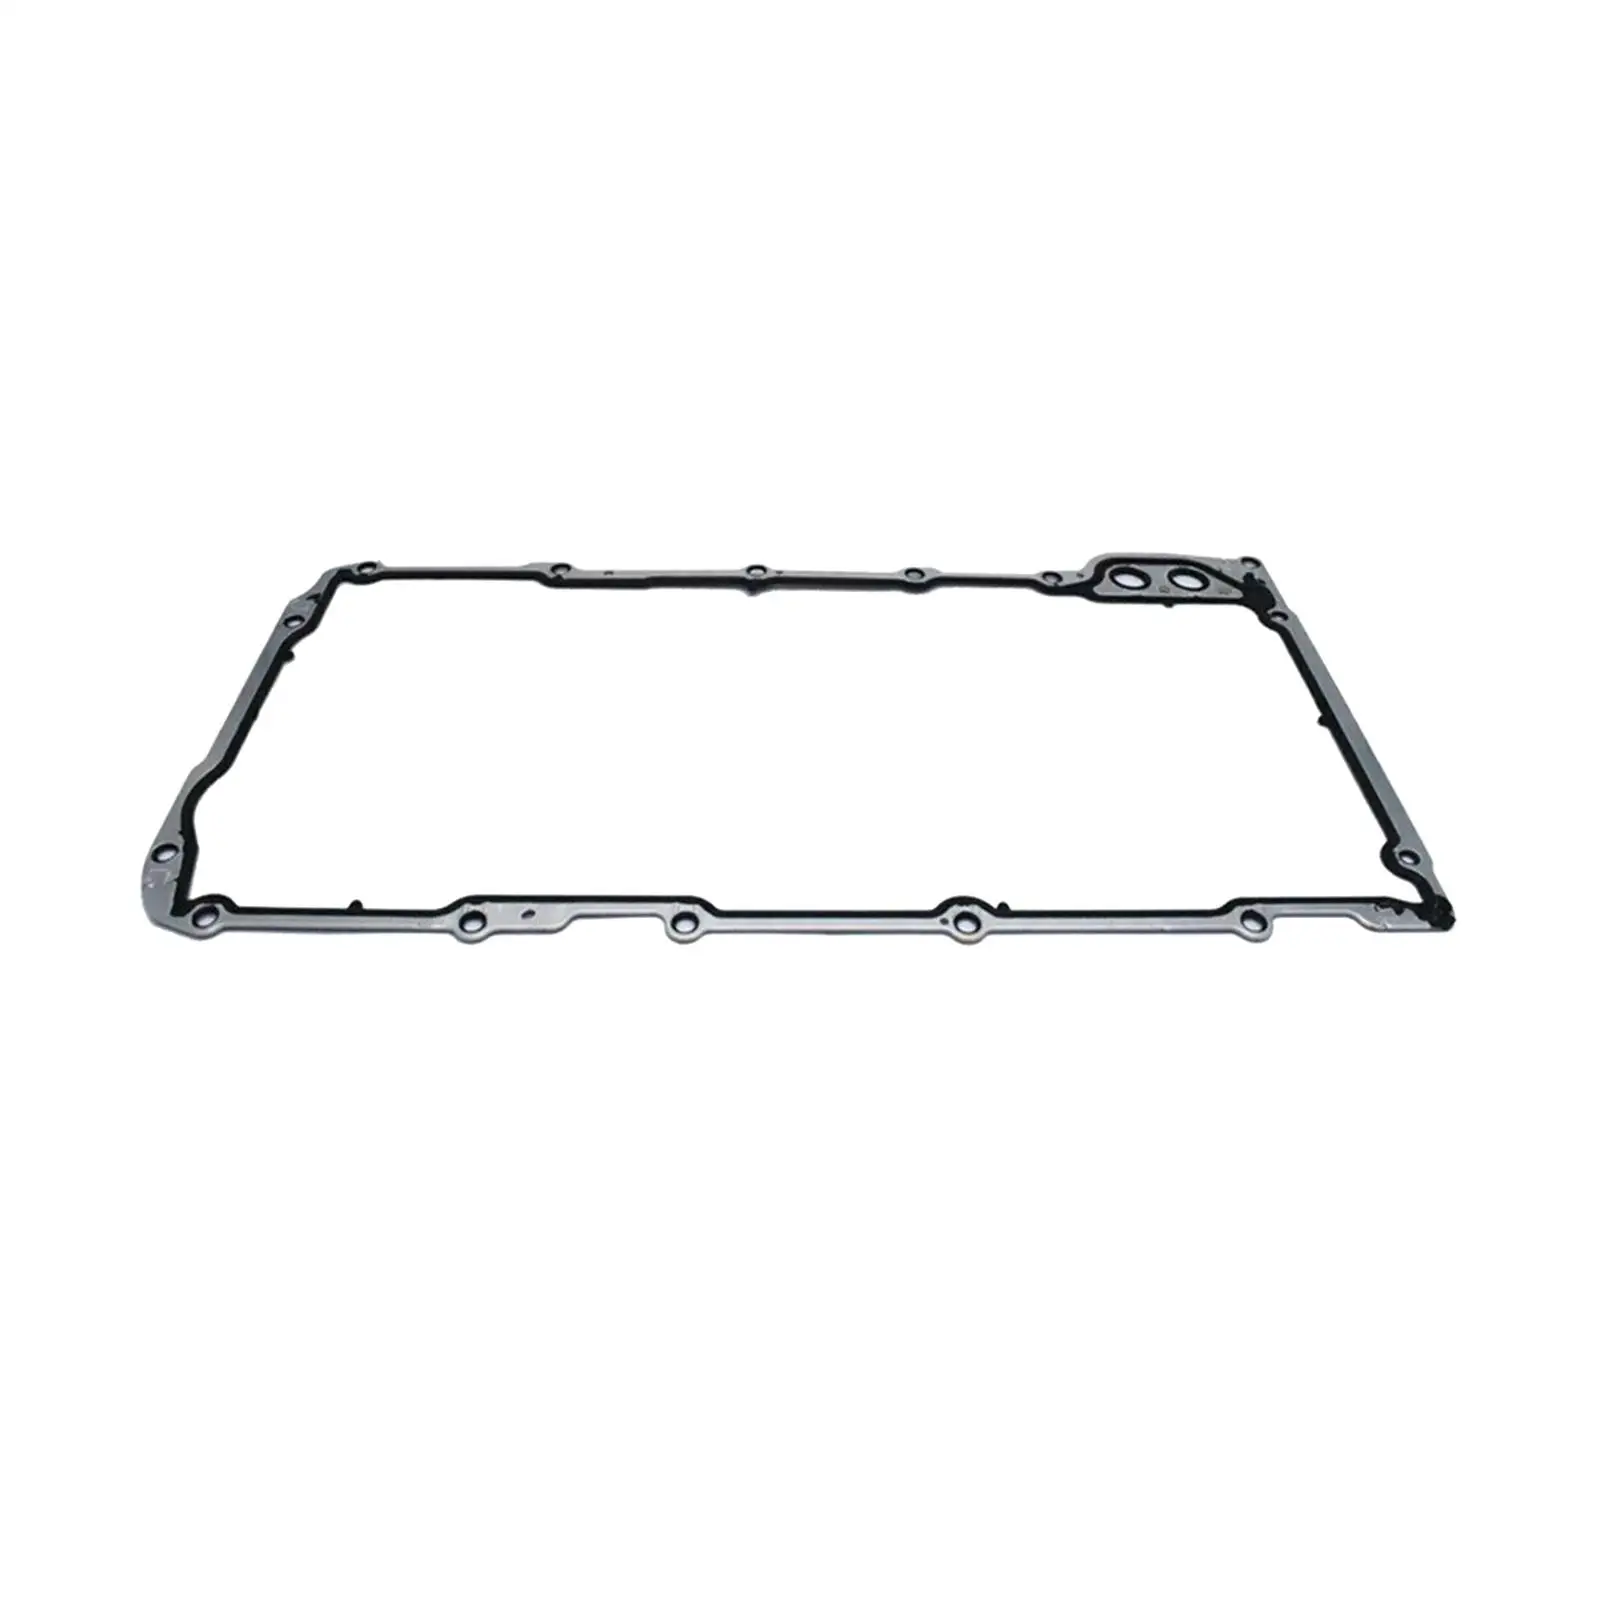 Engine Oil Pan Gasket OS32241 for Hummer Replaces Easy to Install